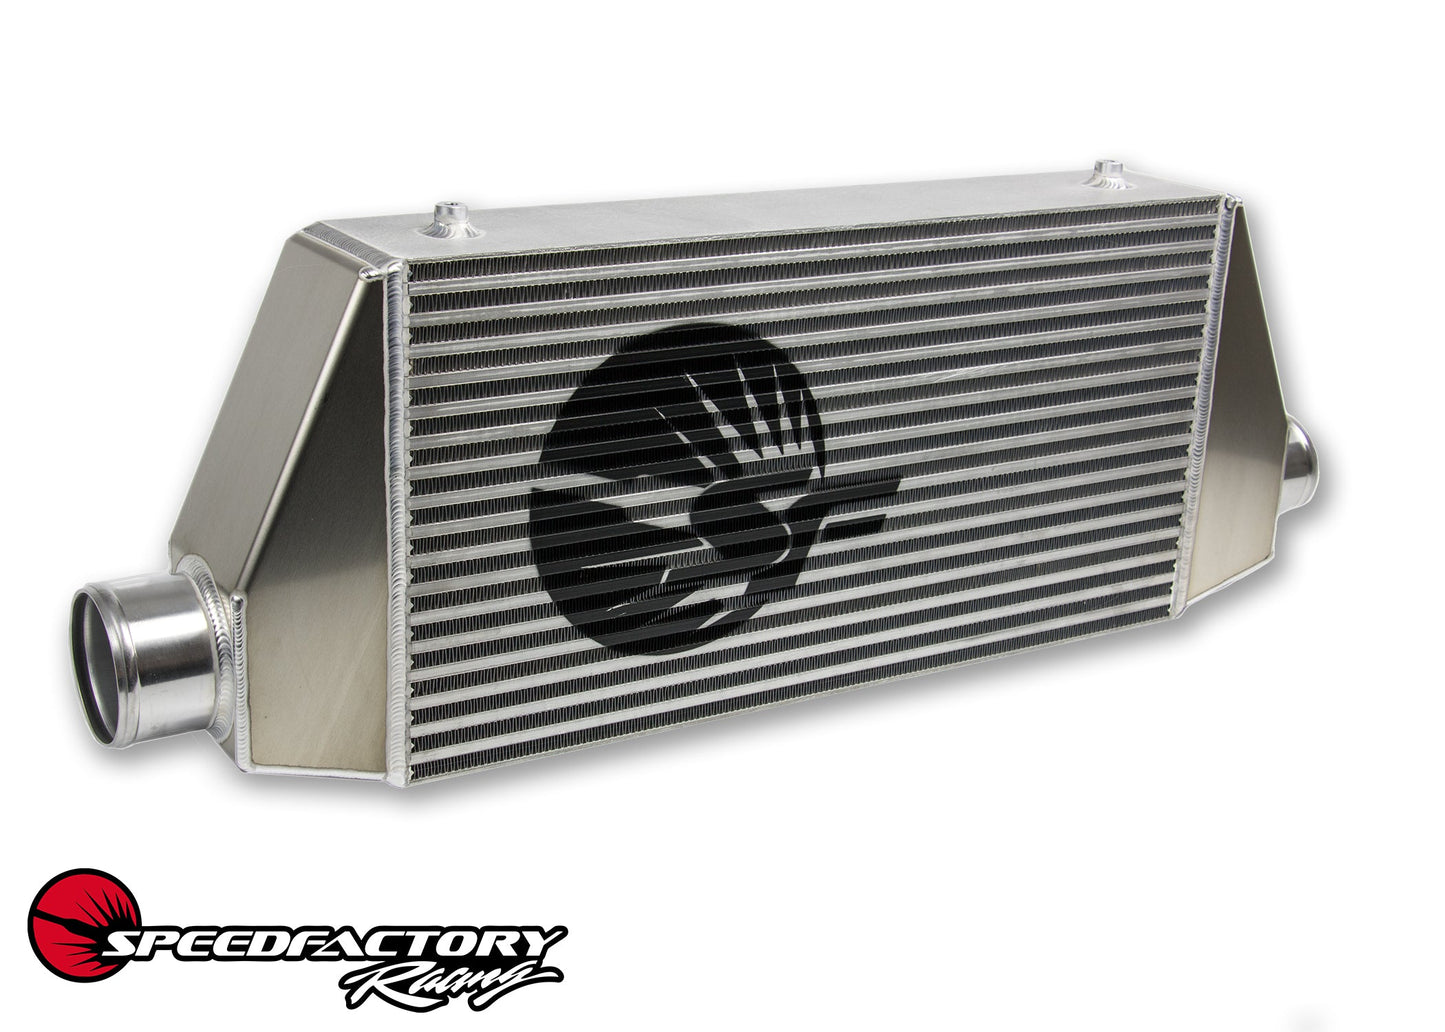 SpeedFactory Racing Standard Side Inlet/Outlet Universal Front Mount Intercooler - 3" Inlet / 3" Outlet (600HP-850HP)